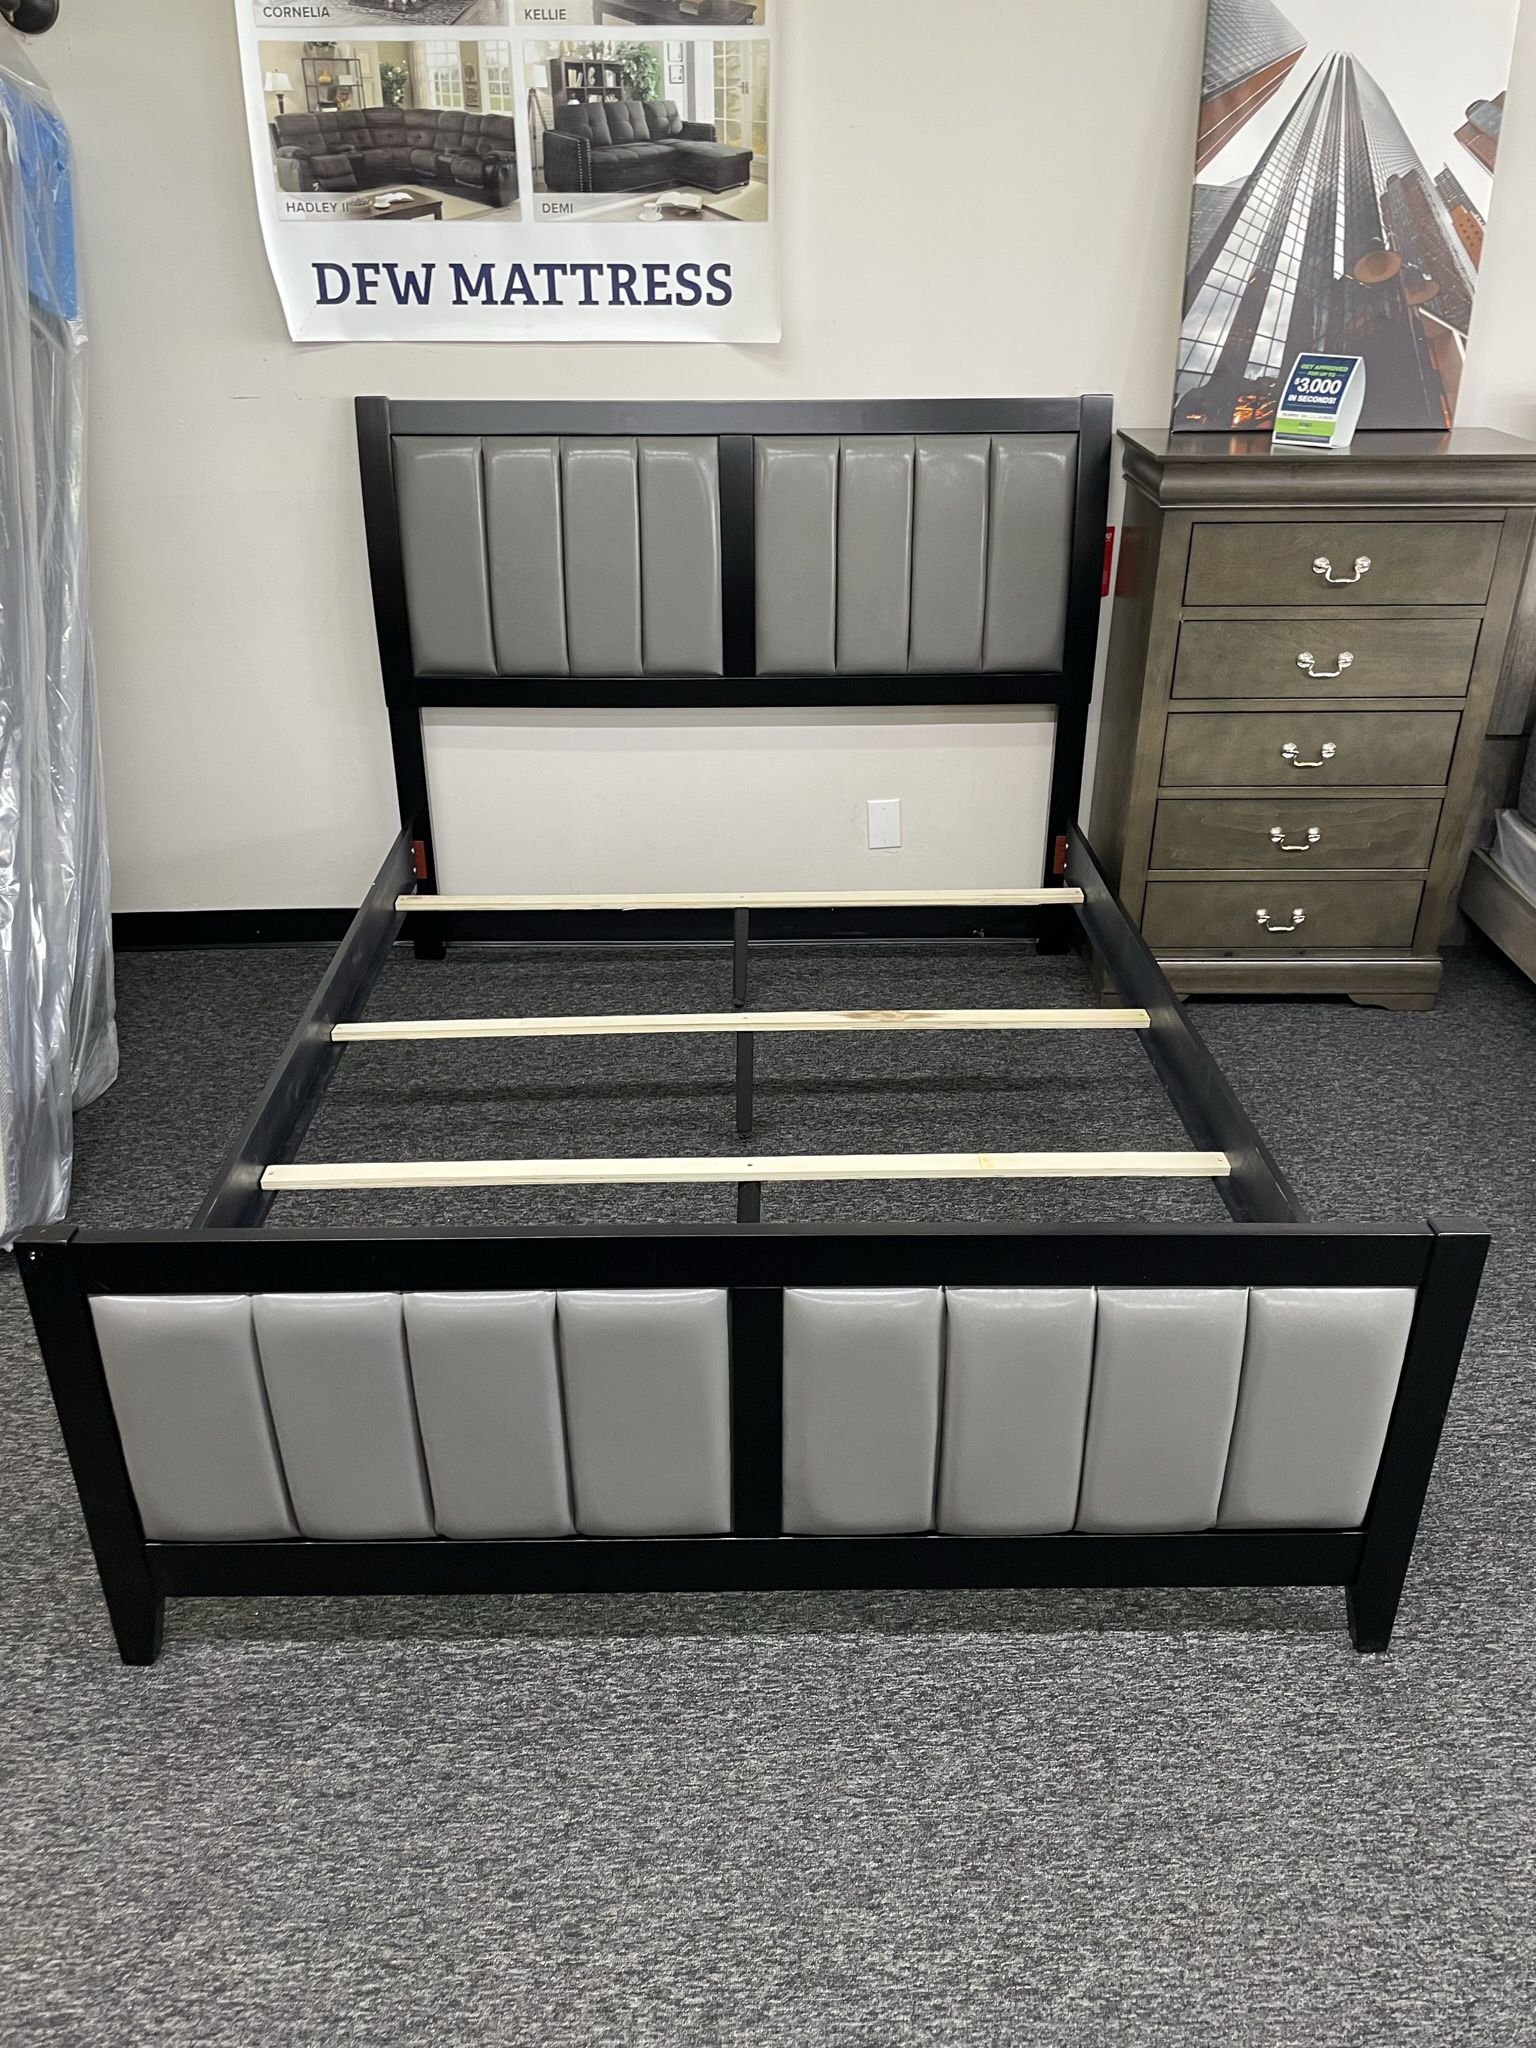 (JUST $54 DOWN) Brand New Queen Bed (Financing and Delivery available)